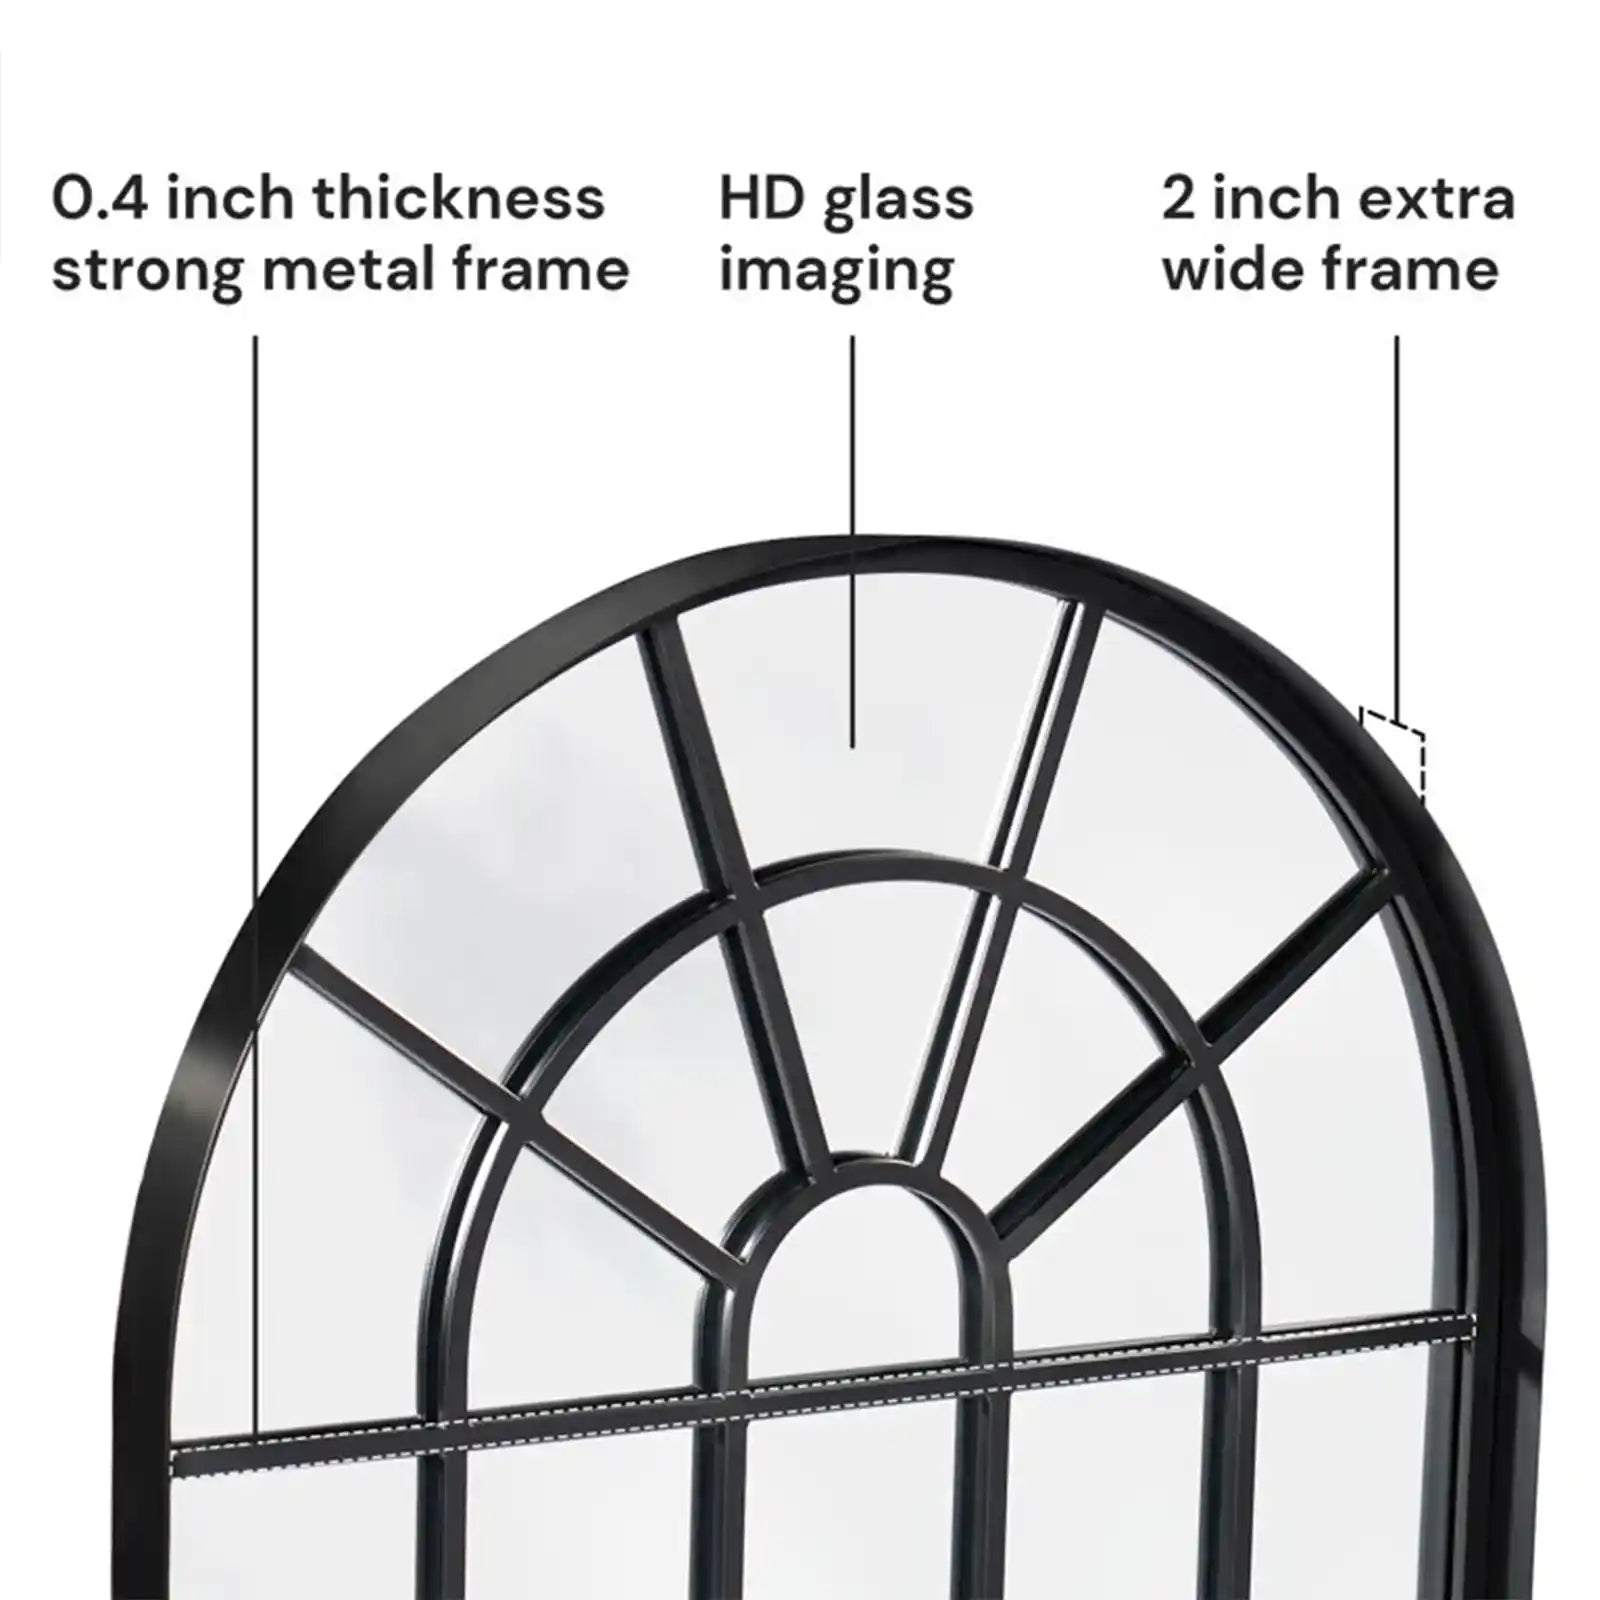 Arched Wall Mount Mirror 32" x 20", Black Window Frame Decorative Mirror, Wall Decor, Farmhouse Arch Mirror, Rustic Vintage Style Hanging Mirror for Living, Entryway, Bedroom